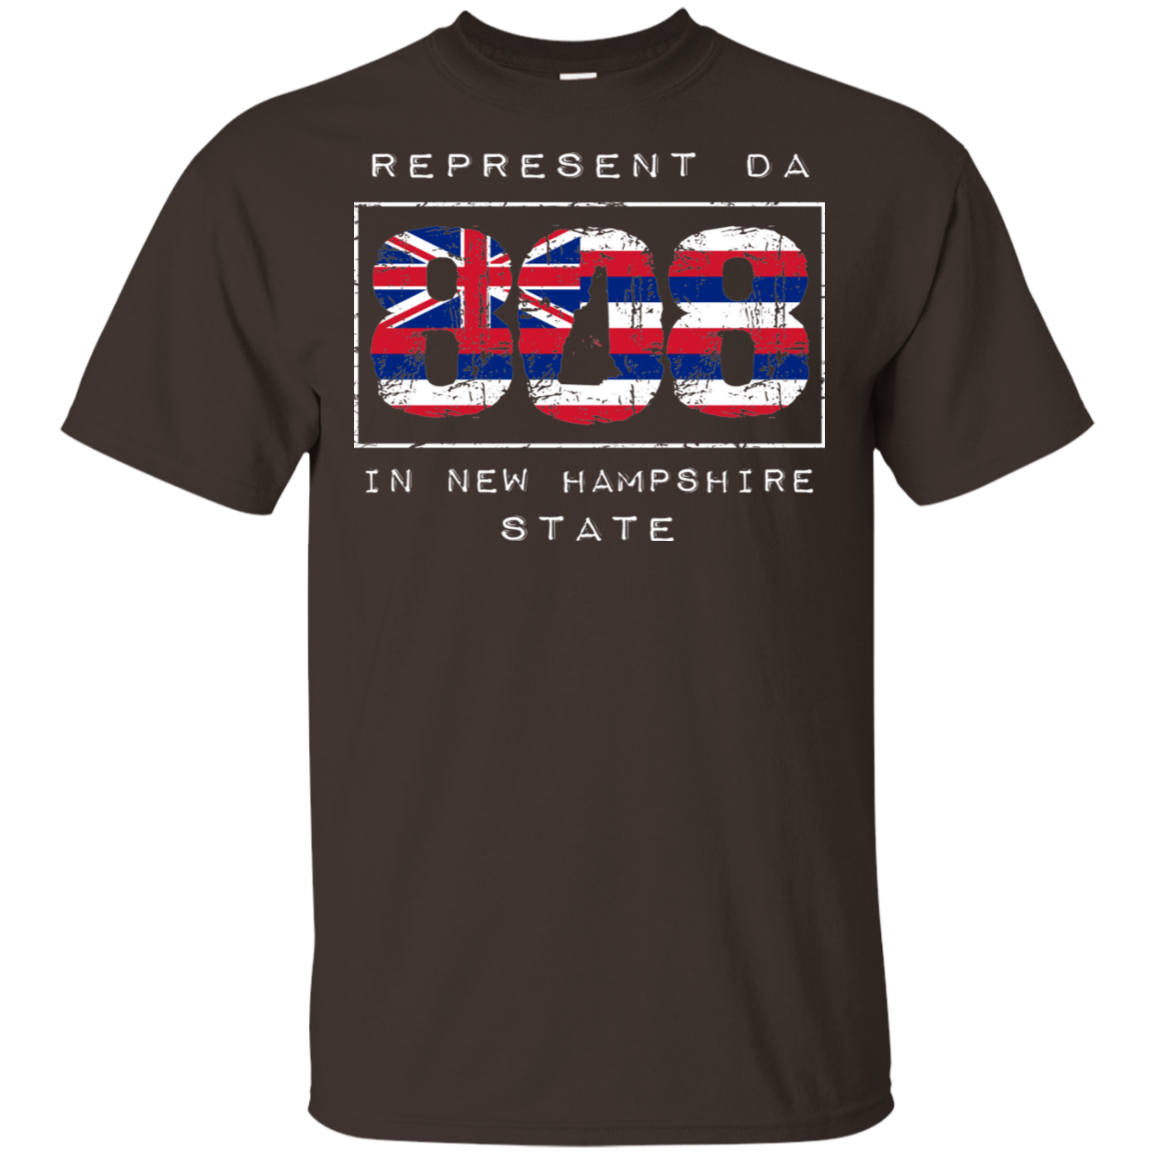 Rep Da 808 In New Hampshire State Ultra Cotton T-Shirt, T-Shirts, Hawaii Nei All Day